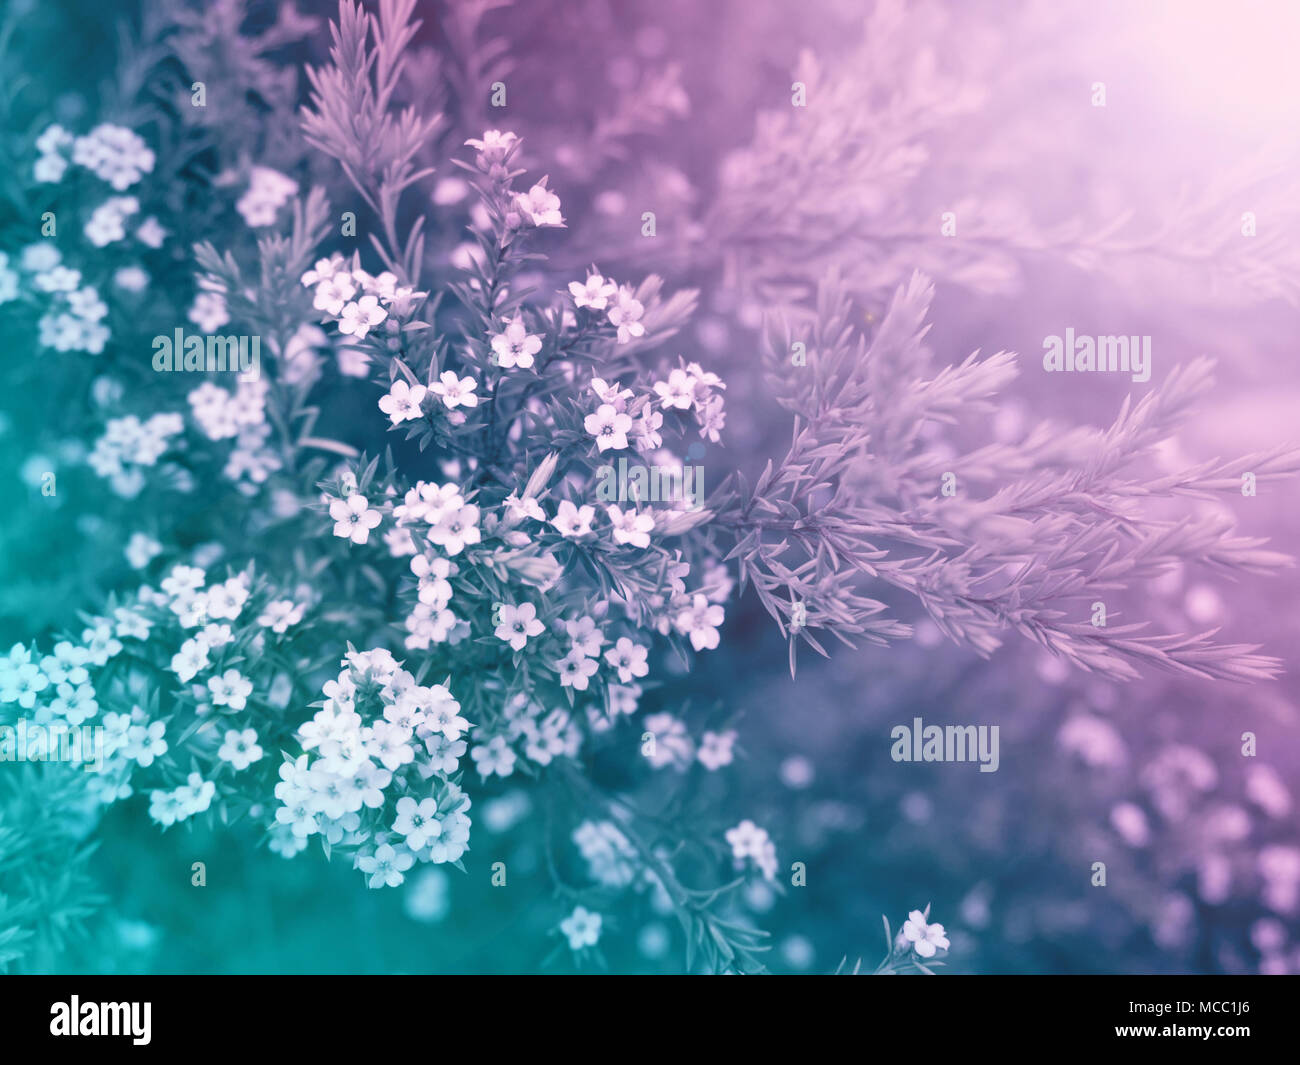 Beautiful small white diosma flowers on the colorful blurred background. Floral desktop.Toned image. Stock Photo